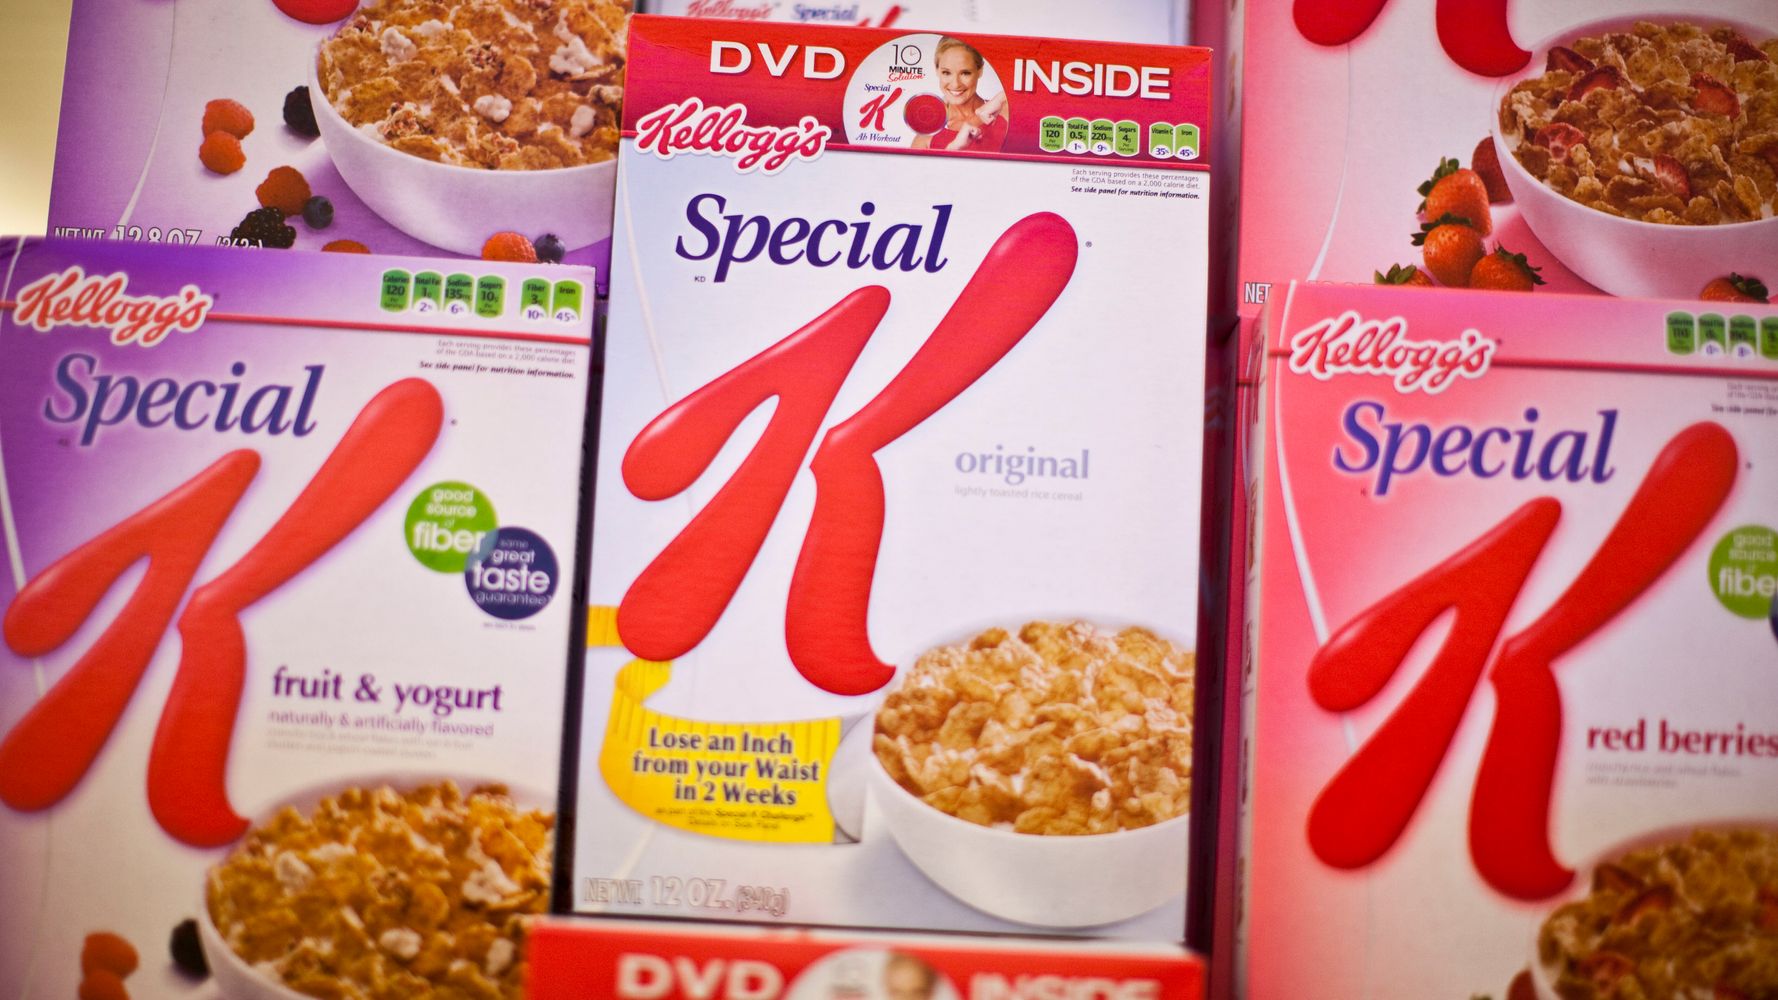 Why Kellogg's Workers Are On Strike | HuffPost Impact